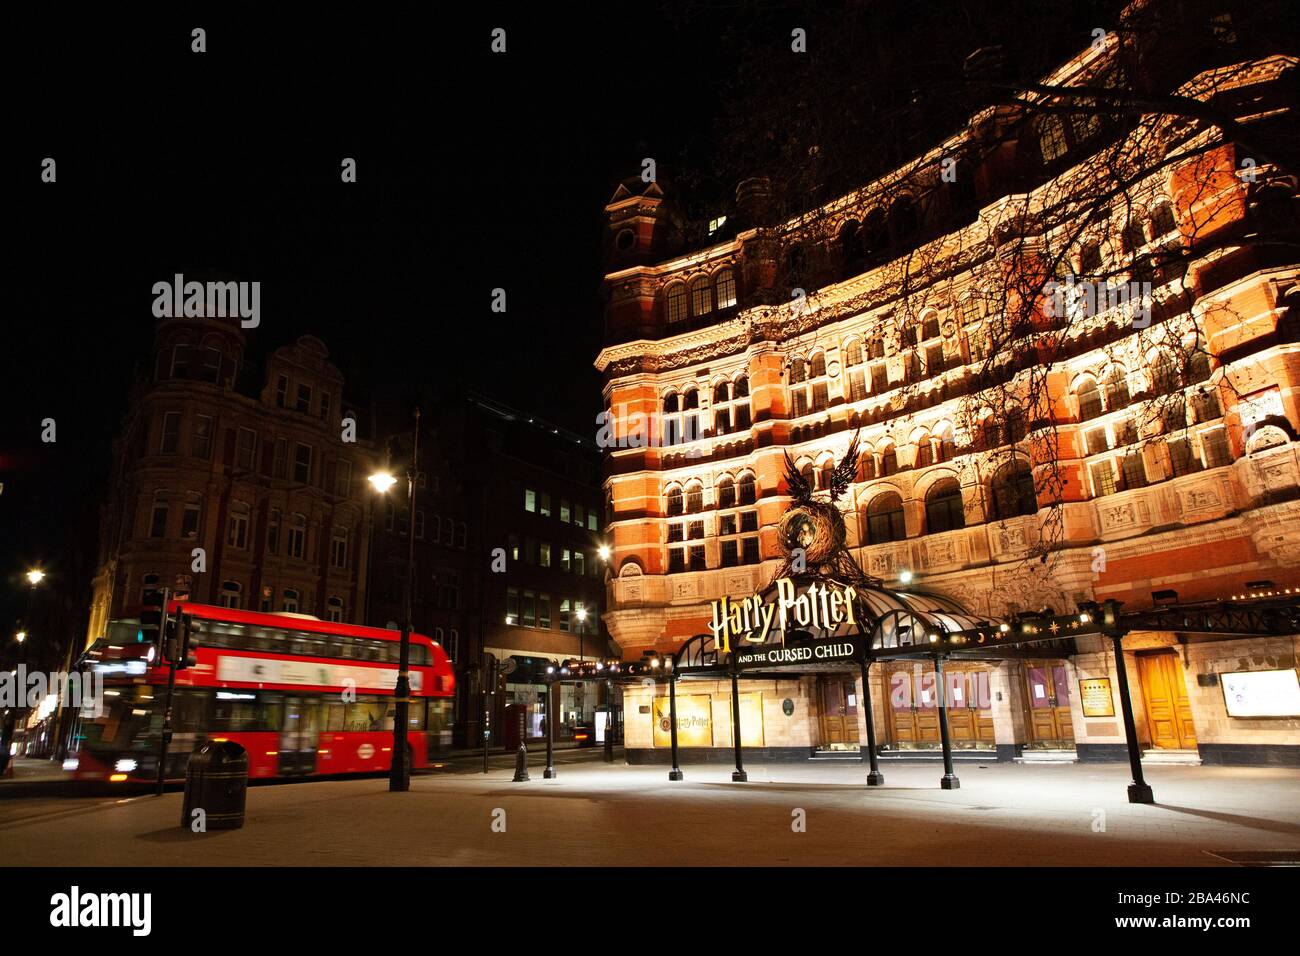 London, UK: thelights are on but no-one is home. The West End is deserted in the evening during the covid-19 lockdown. Although the Cambridge Theatre is illuminated with signs for Harry Potter and the Cursed Child, the show is not running and nearby pubs and restaurants are all closed too. Anna Watson/Alamy Live News Stock Photo